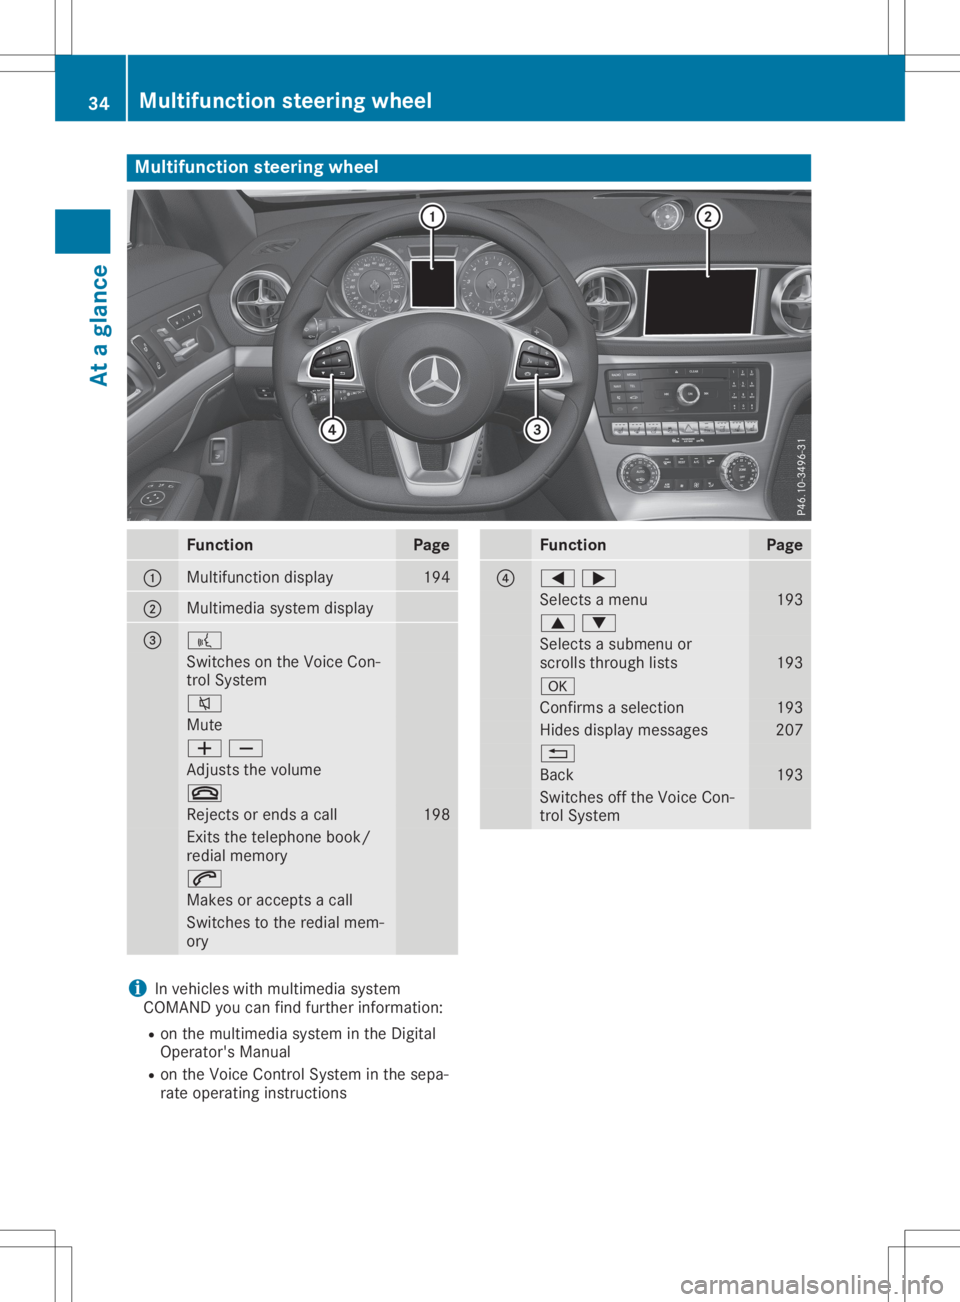 MERCEDES-BENZ SL CLASS 2020  Owners Manual Multifunc
tionsteering wheel Func
tion Page
0043
Mul
tifunction display 194
0044
Mul
timedi asystem display 0087 0059
Switches
onthe Voice Con-
trol System 0063
Mute
00810082
Adju
ststhe volum e 0076
